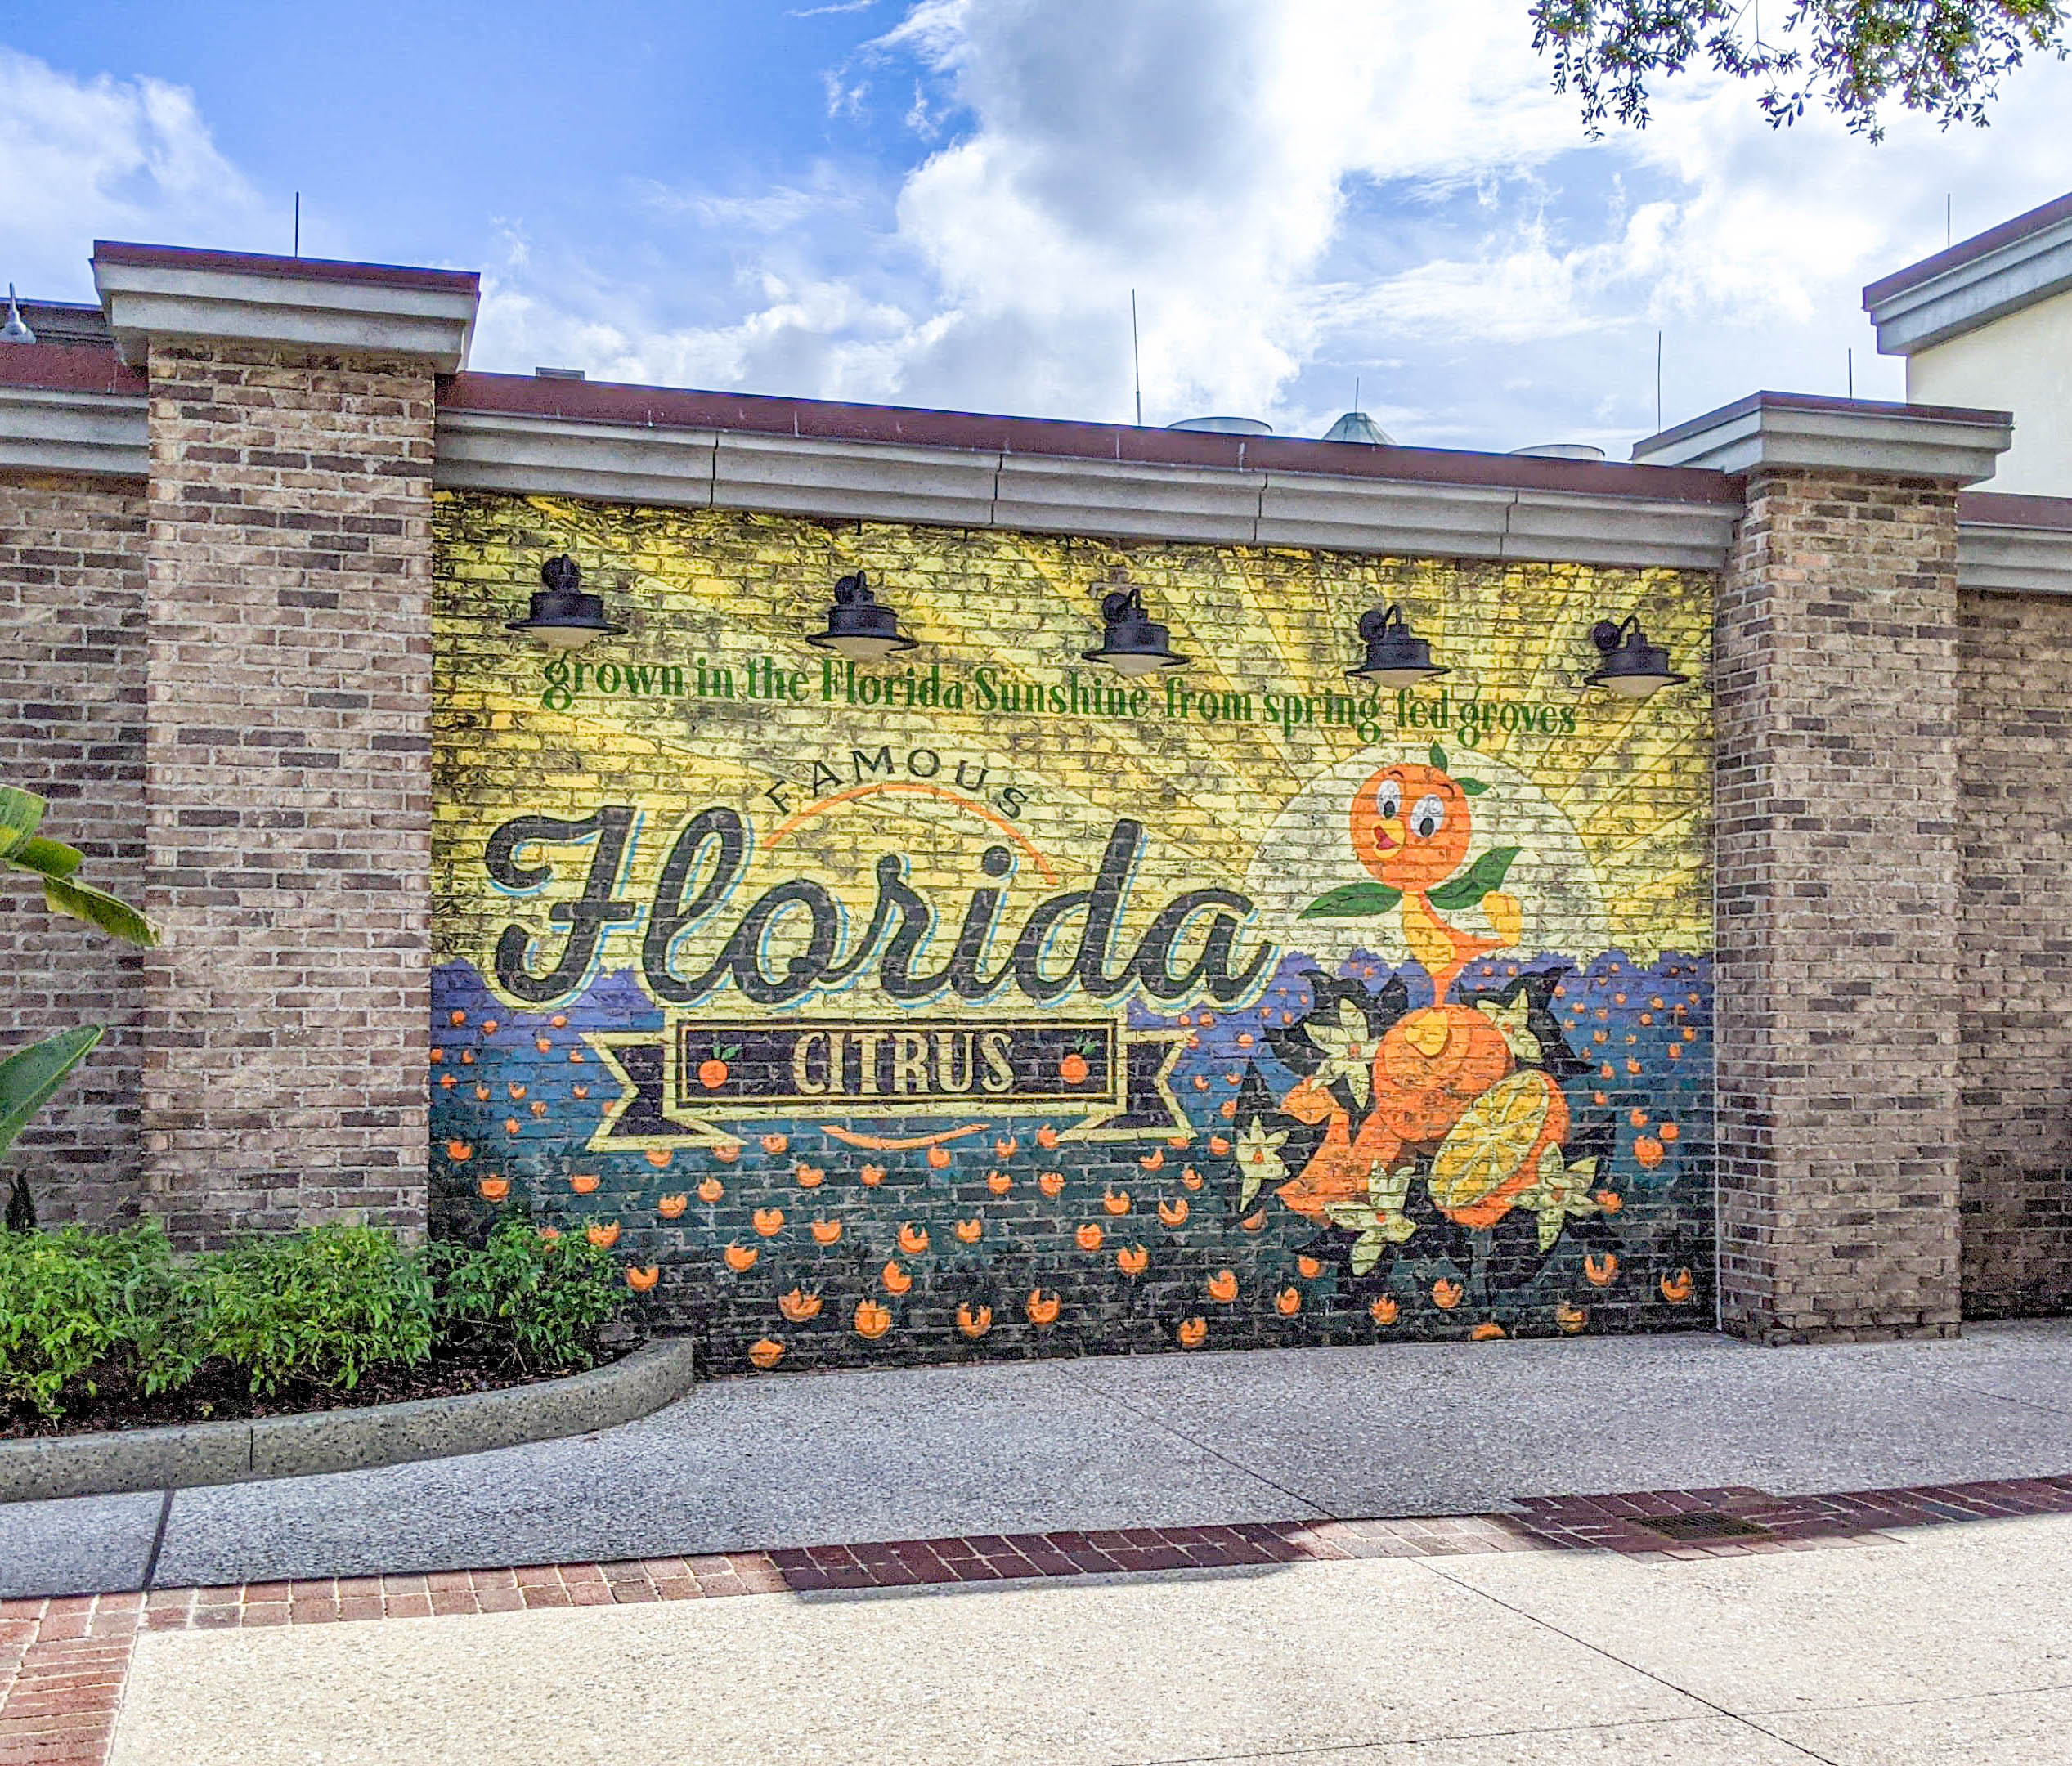 Insider Tips for Orlando Theme Parks - Choice Hotels